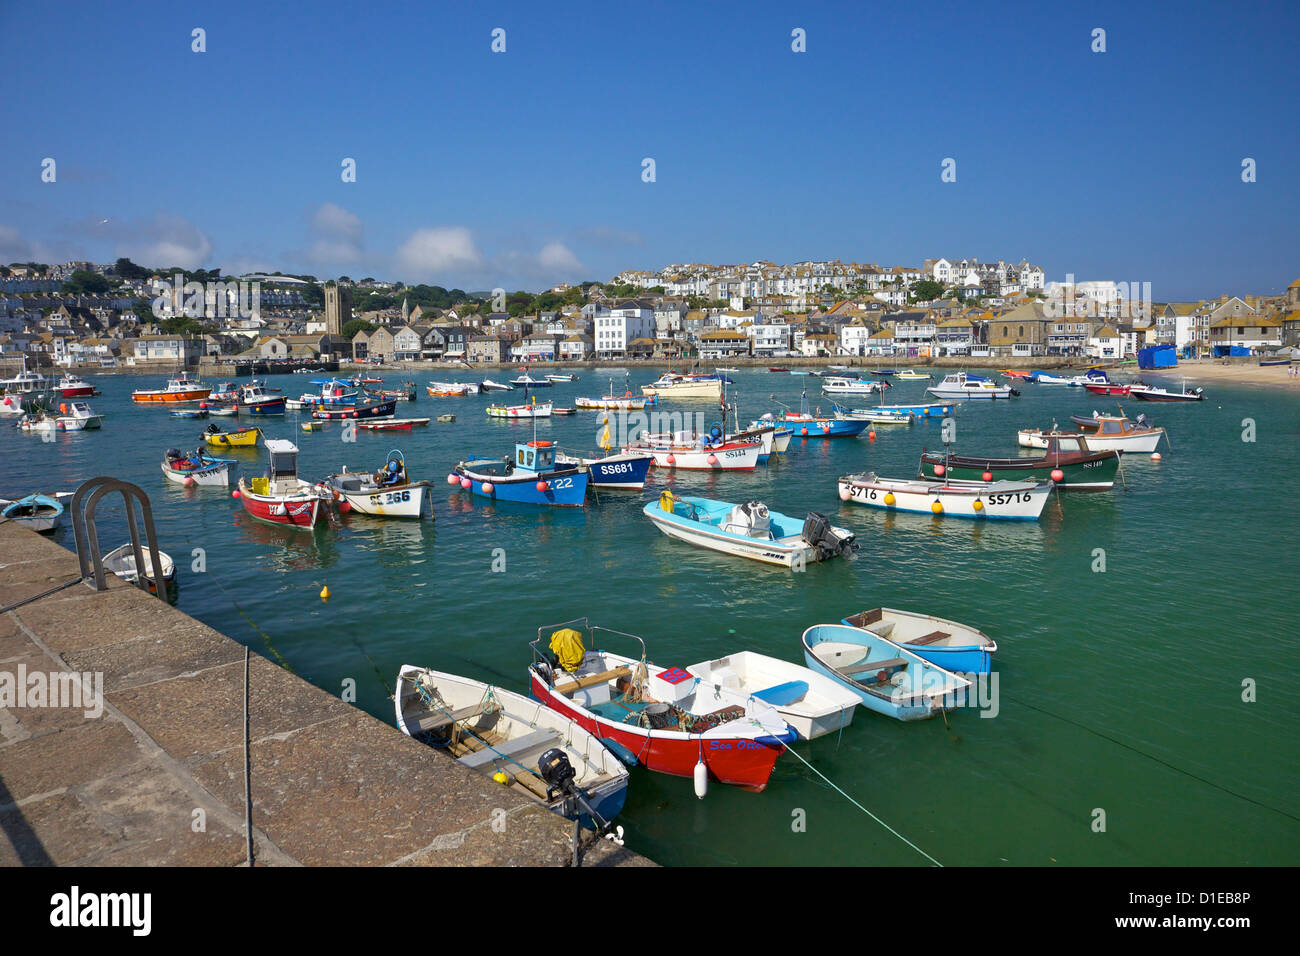 Summer sunshine on boats in the old harbour, St. Ives, Cornwall, England, United Kingdom, Europe Stock Photo